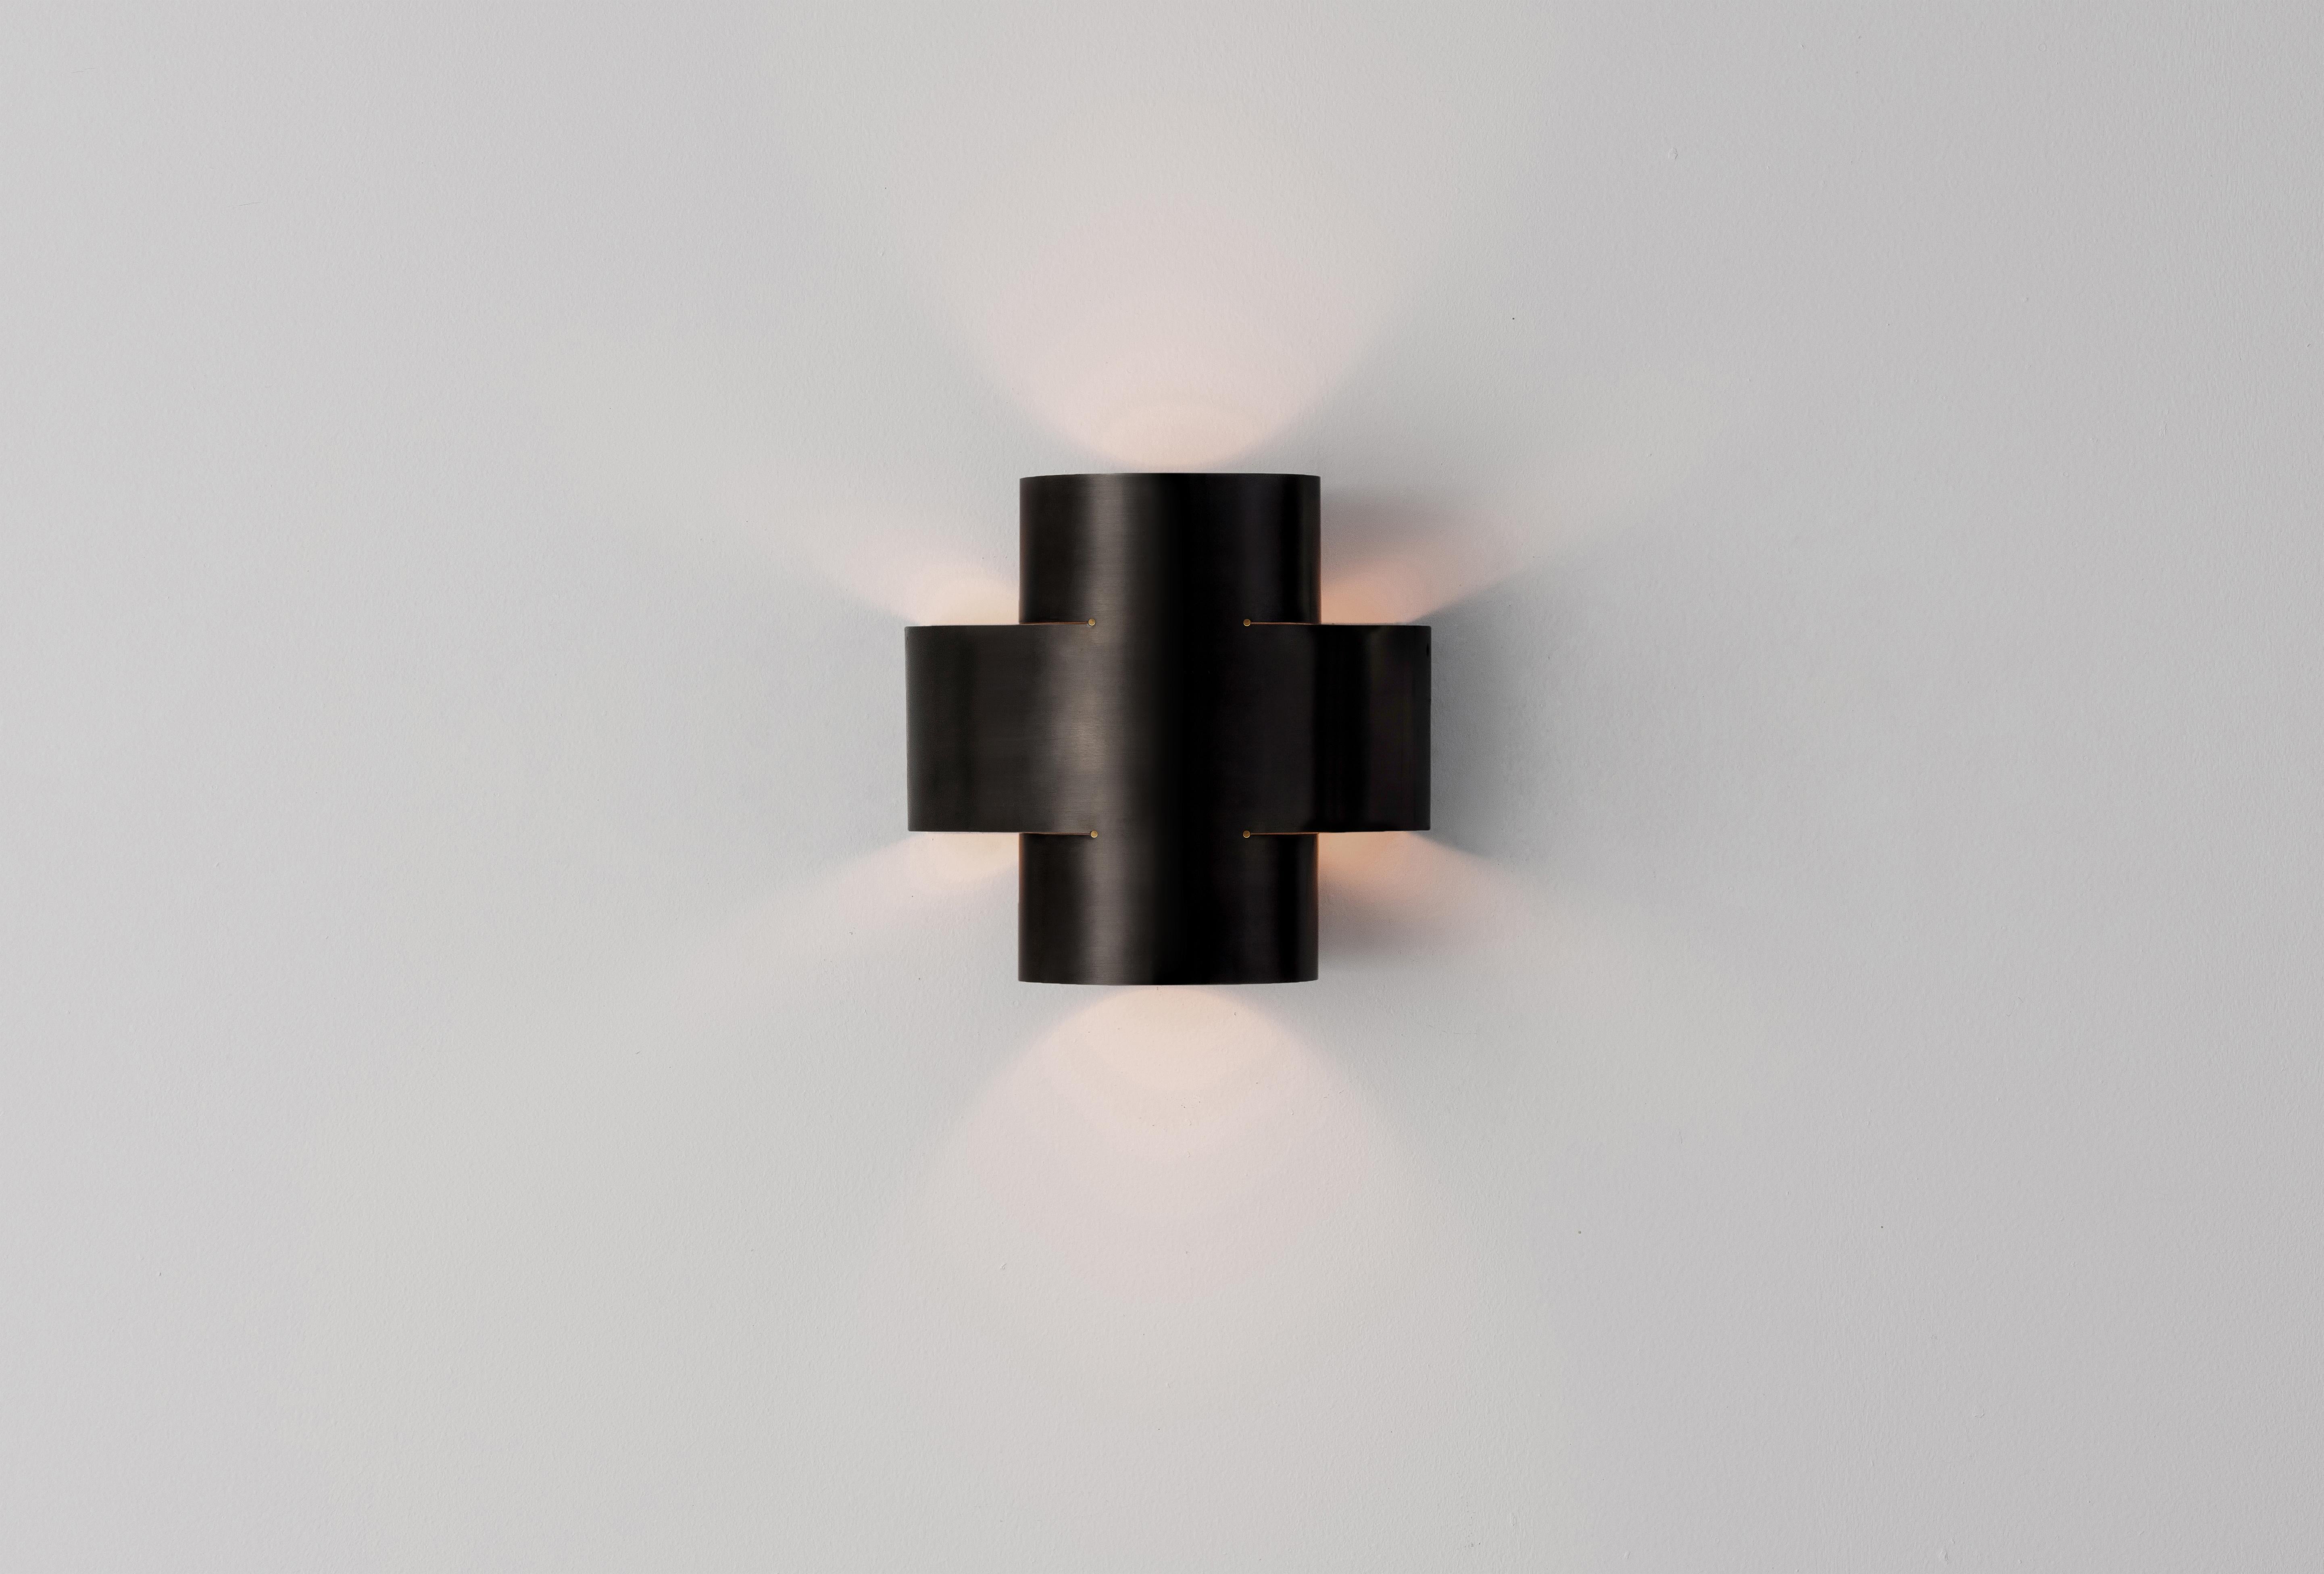 Burnt brass plus one small wall lamp by Paul Matter
Dimensions: L 167 mm, H 170 mm, D 104 mm
1 Type E27 Base, 3W - 5W LED
Warm White, Voltage 220-240V
CE Certified
Dimmable upon request
Materials: Brass

Finished in burnt, aged, buffed brass